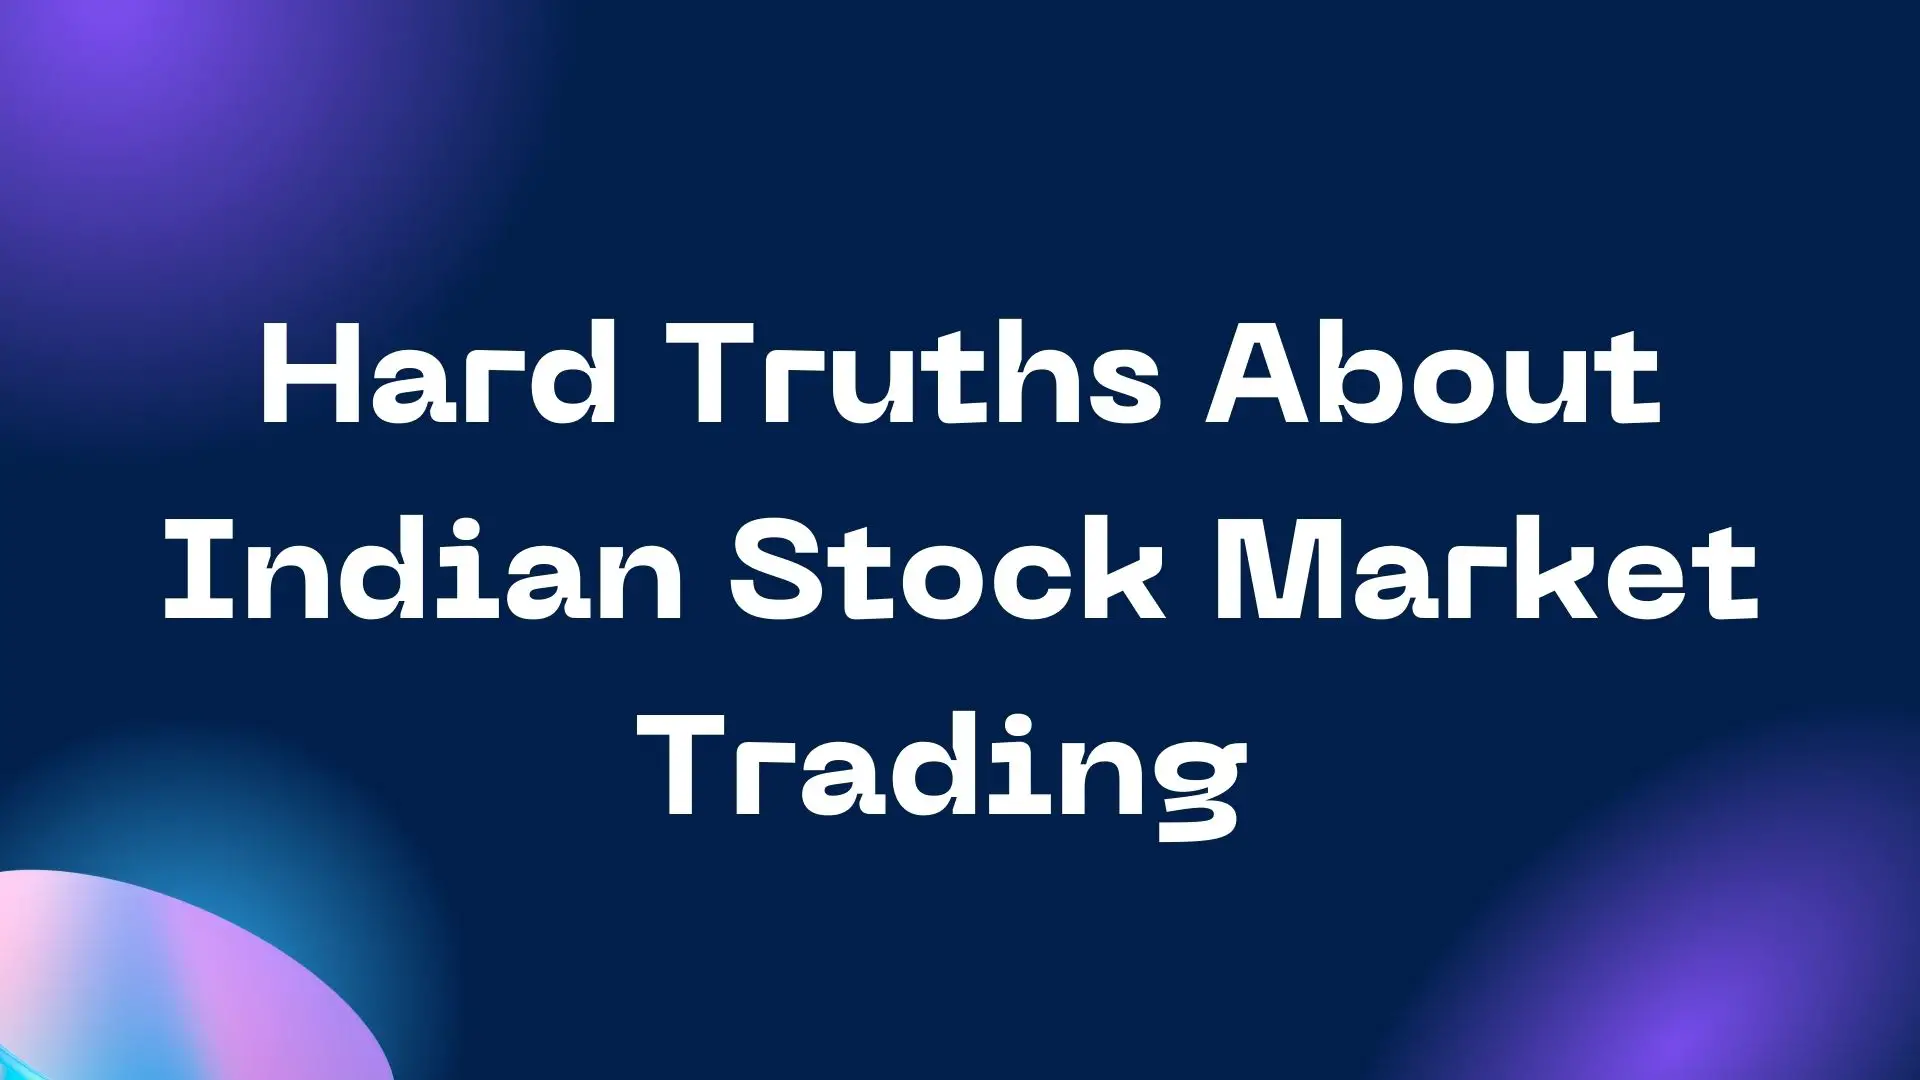 Hard Truths About Indian Stock Market Trading